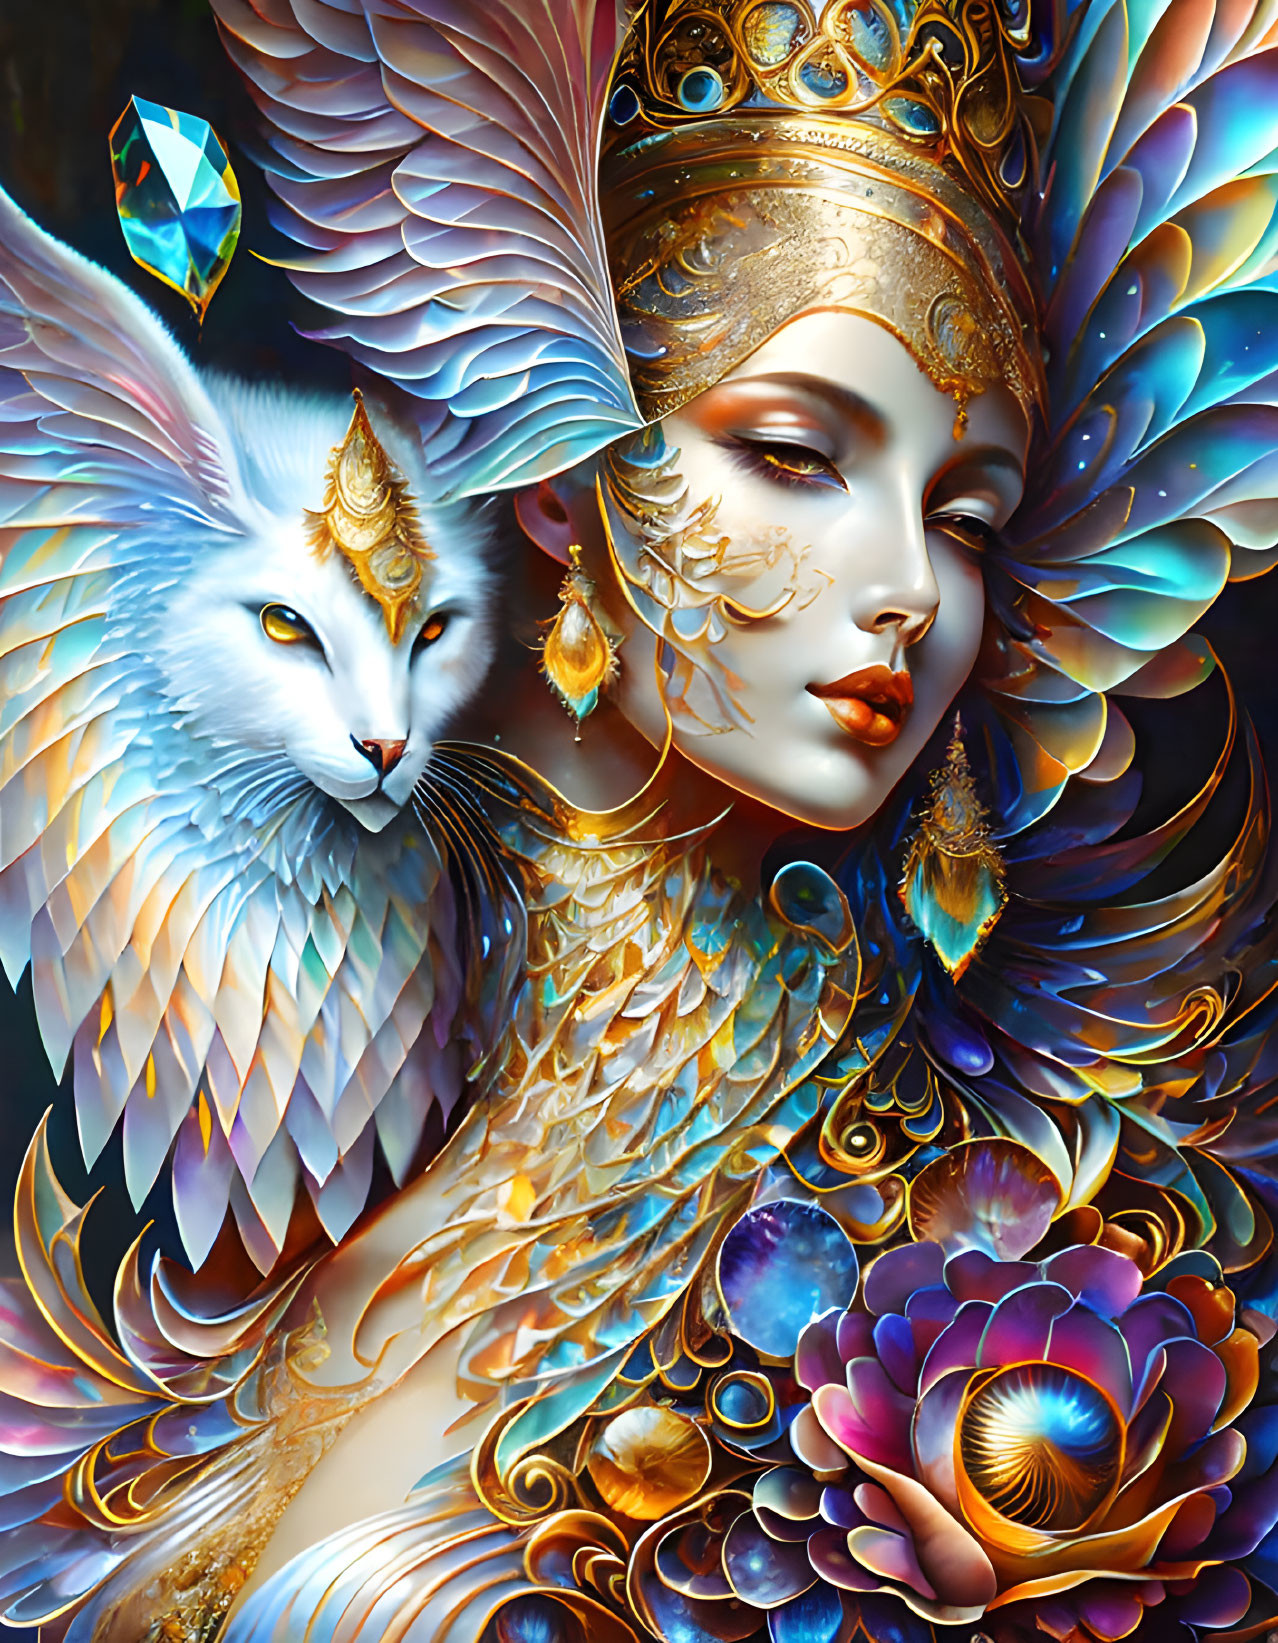 Woman with Golden Headdress and Blue Feathers alongside White Winged Cat - Ornate and Vibrant